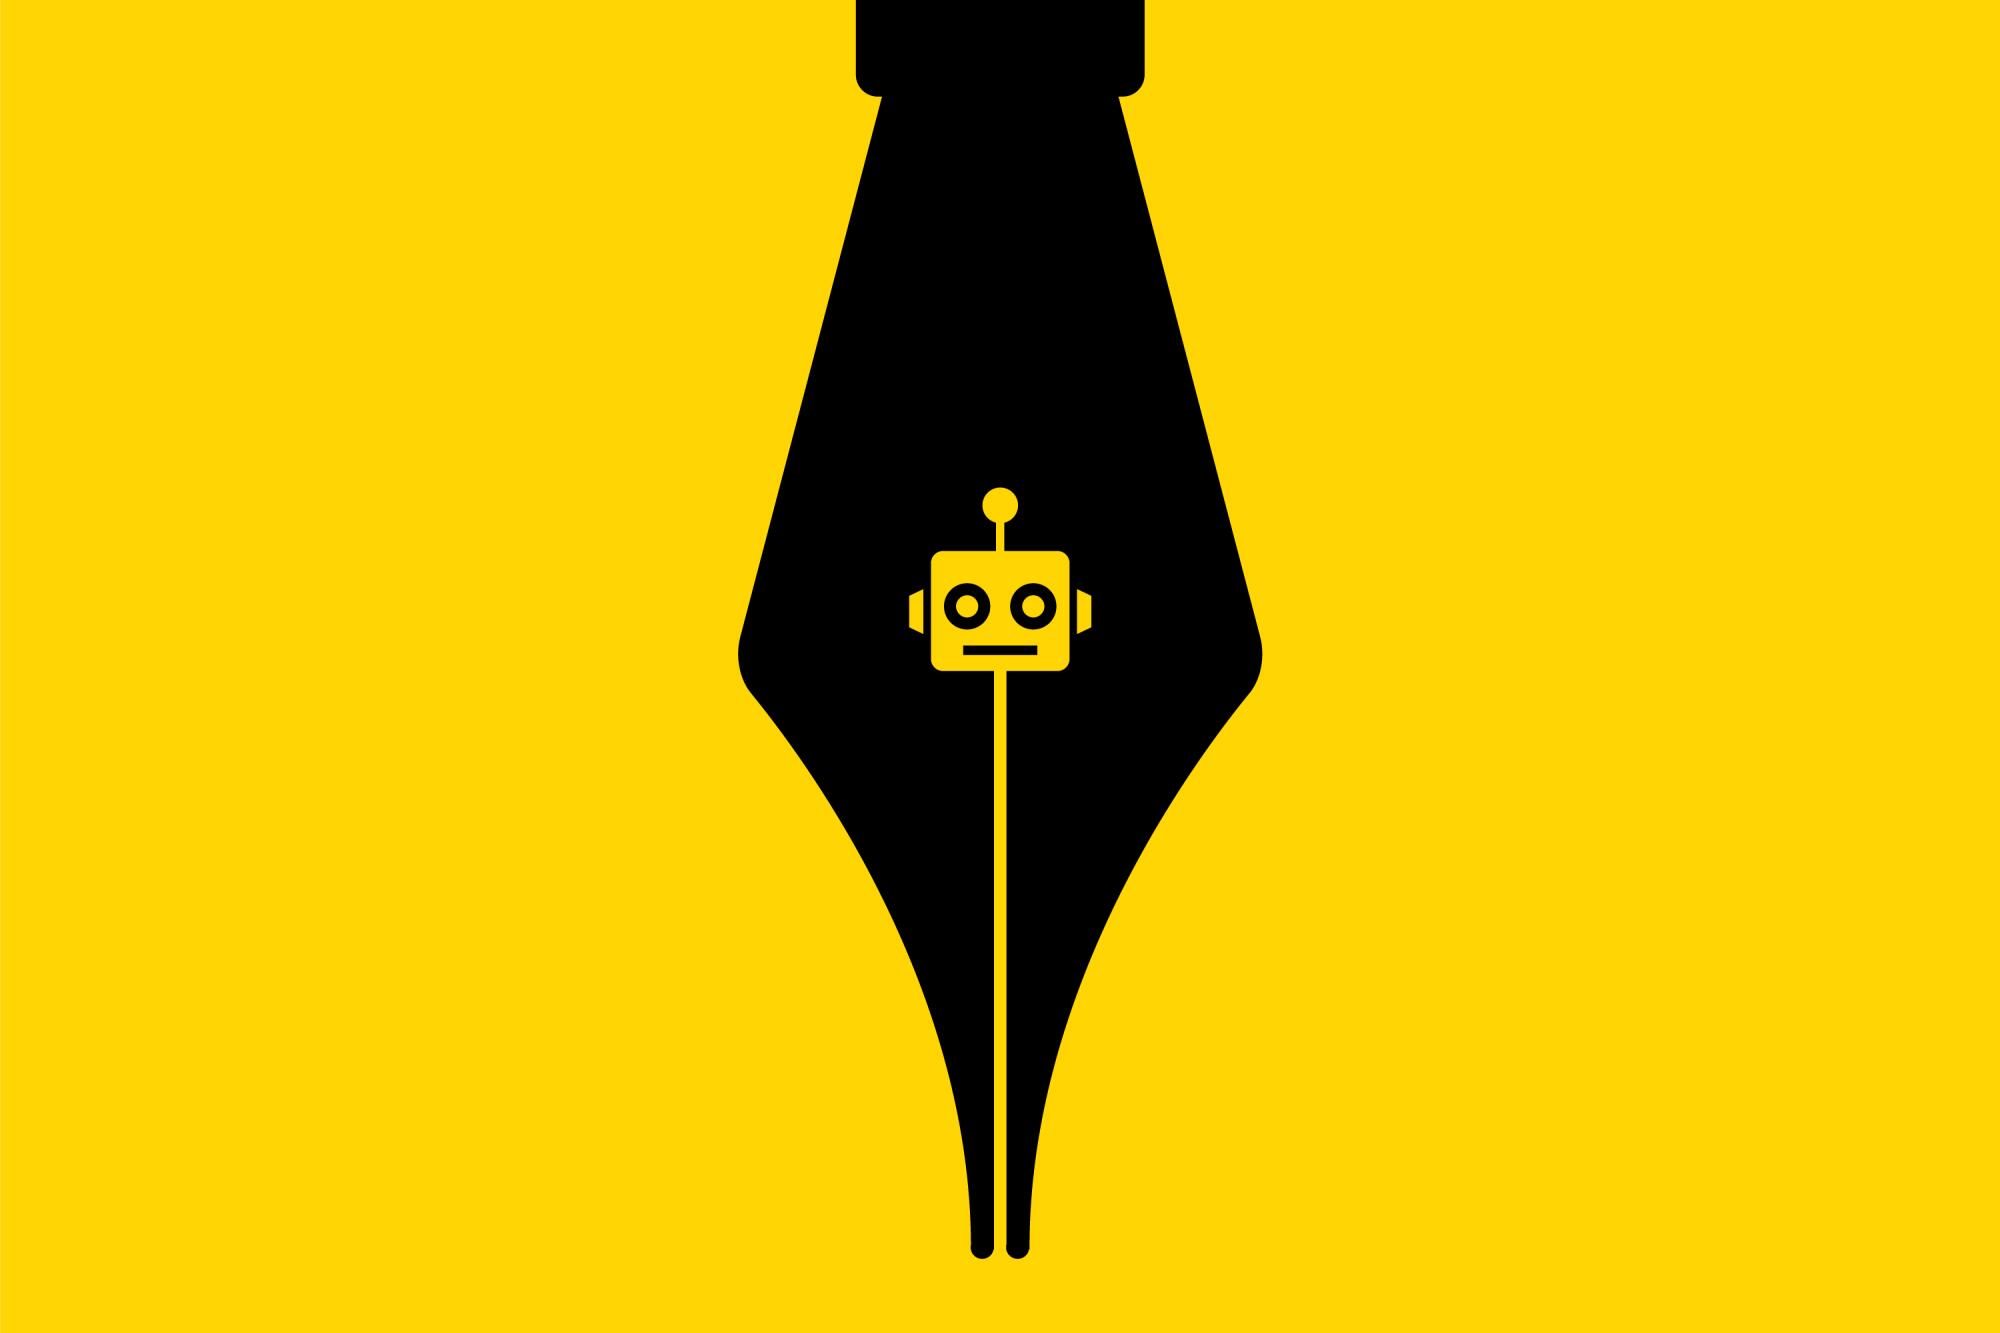 Illustration  shows a black pen nib with a robot head in the center, on a yellow background